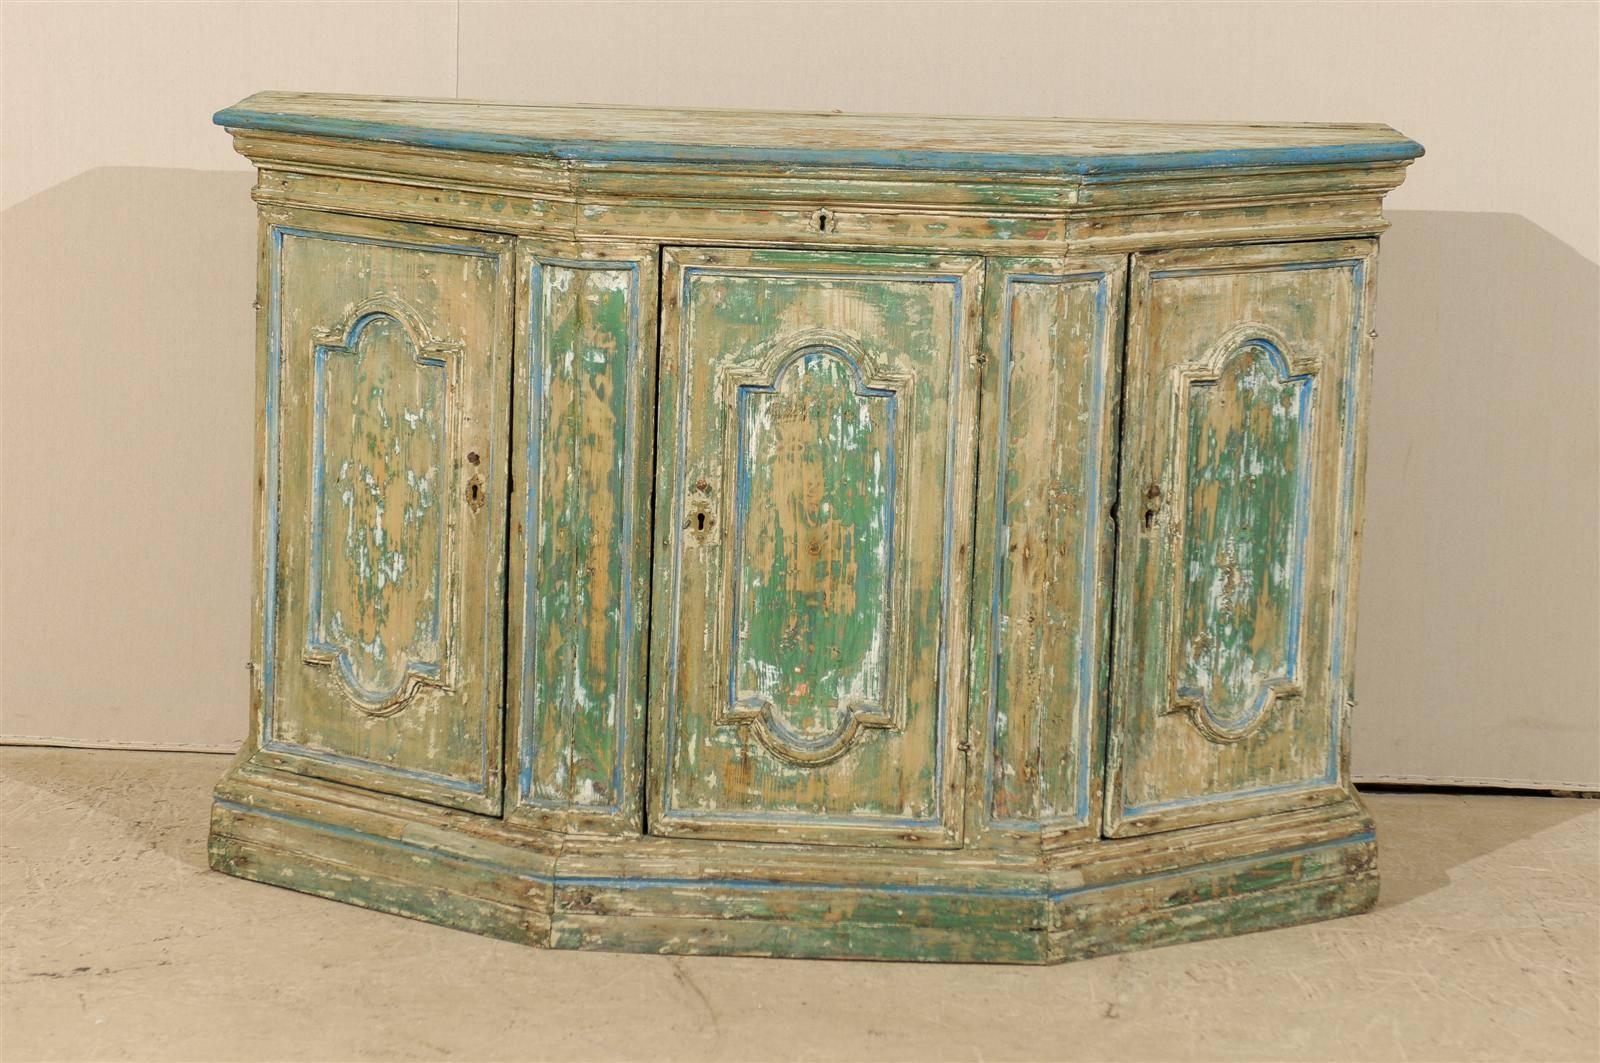 An exquisite Italian, 18th century credenza. This Italian painted credenza features three-carved doors, two of which, on each side, are canted. The credenza has been scraped to its original finish. It is made of a mix of beige and green with the